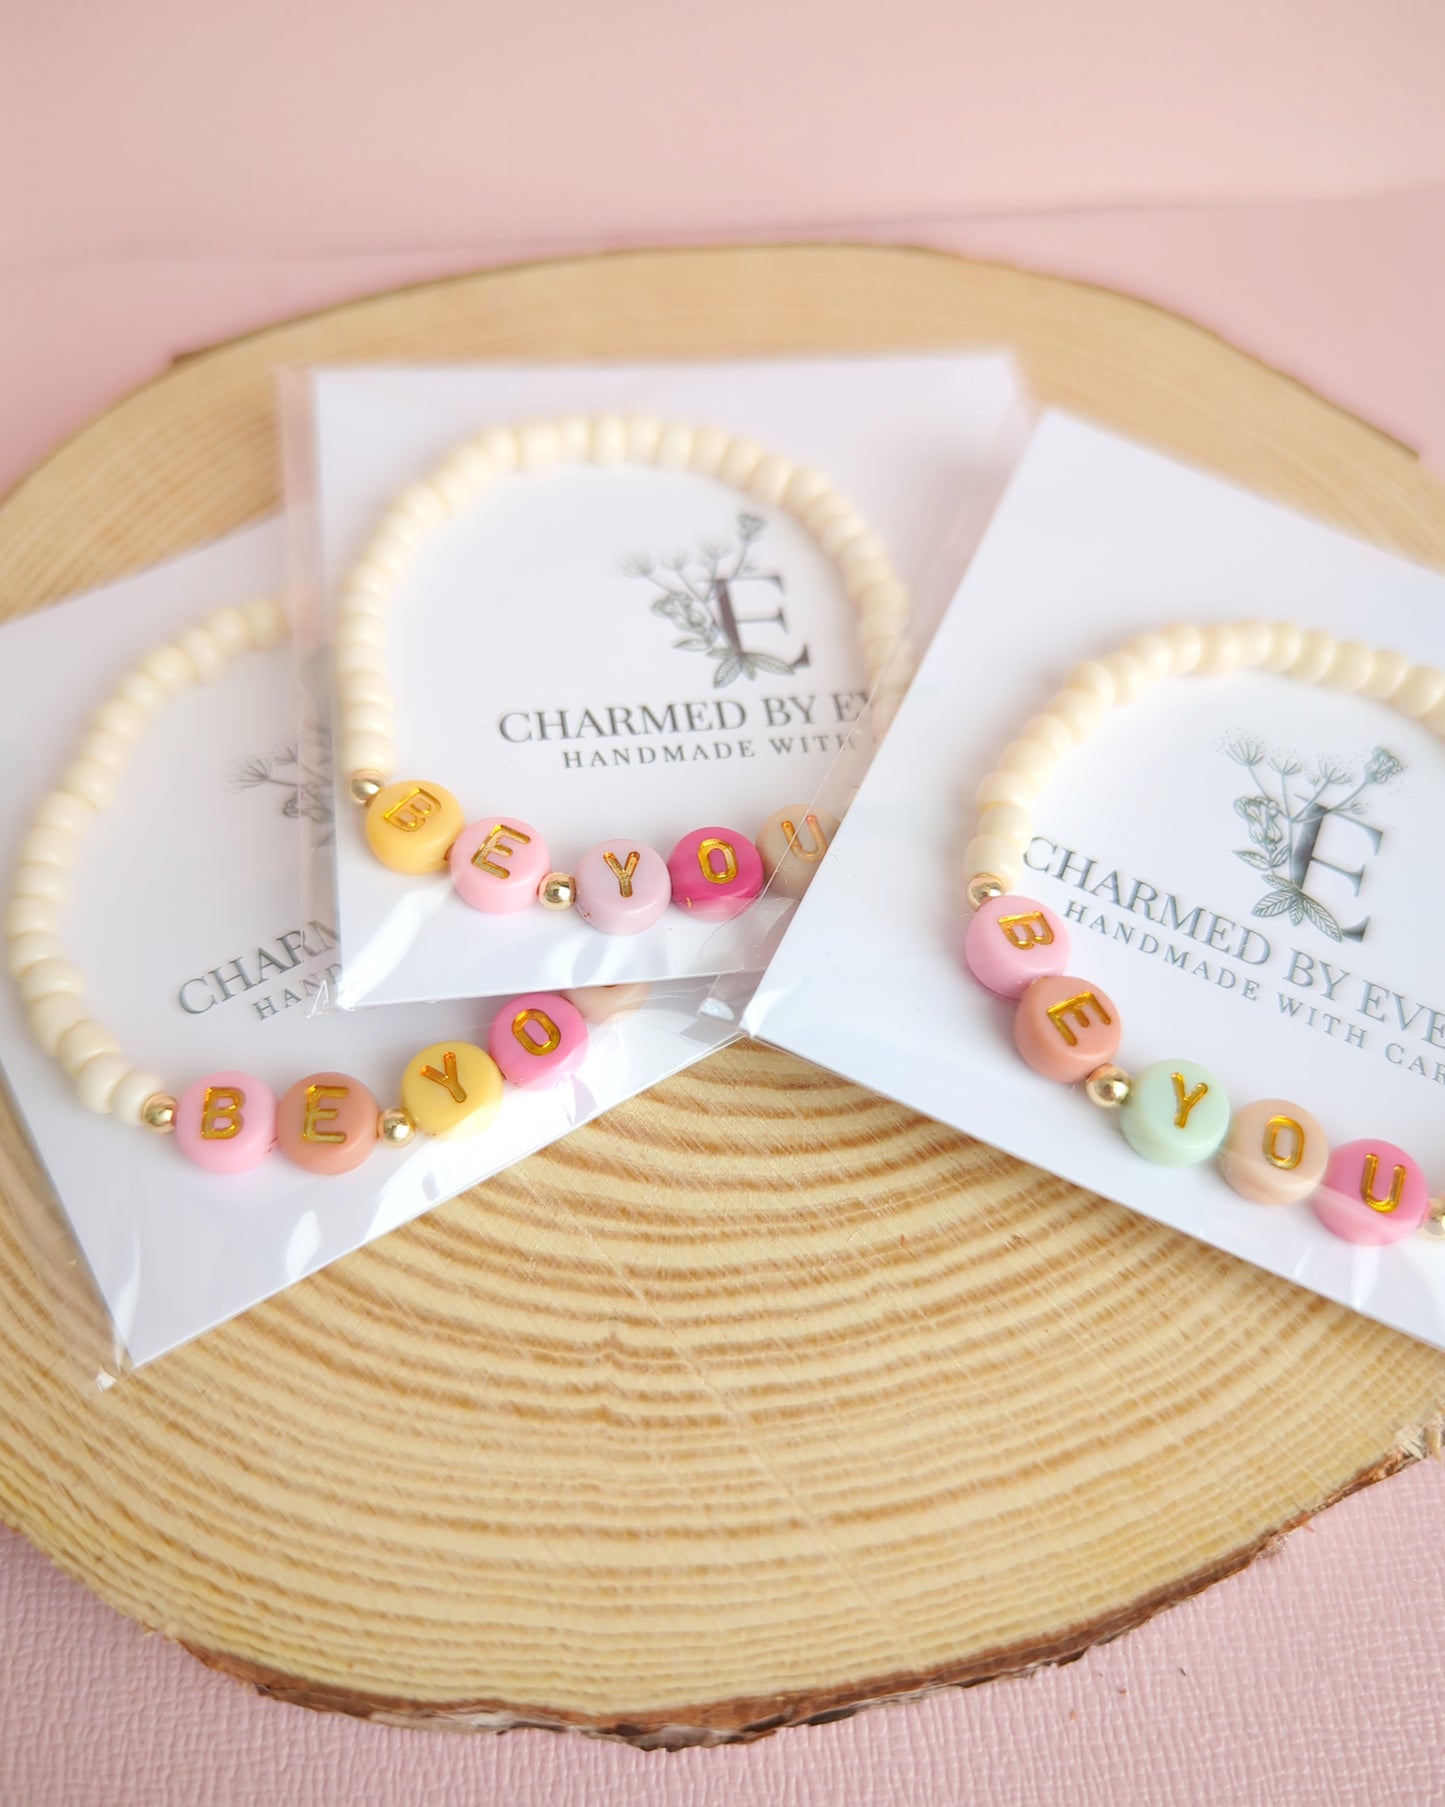 'Be You' bracelet by Charmed by Everly